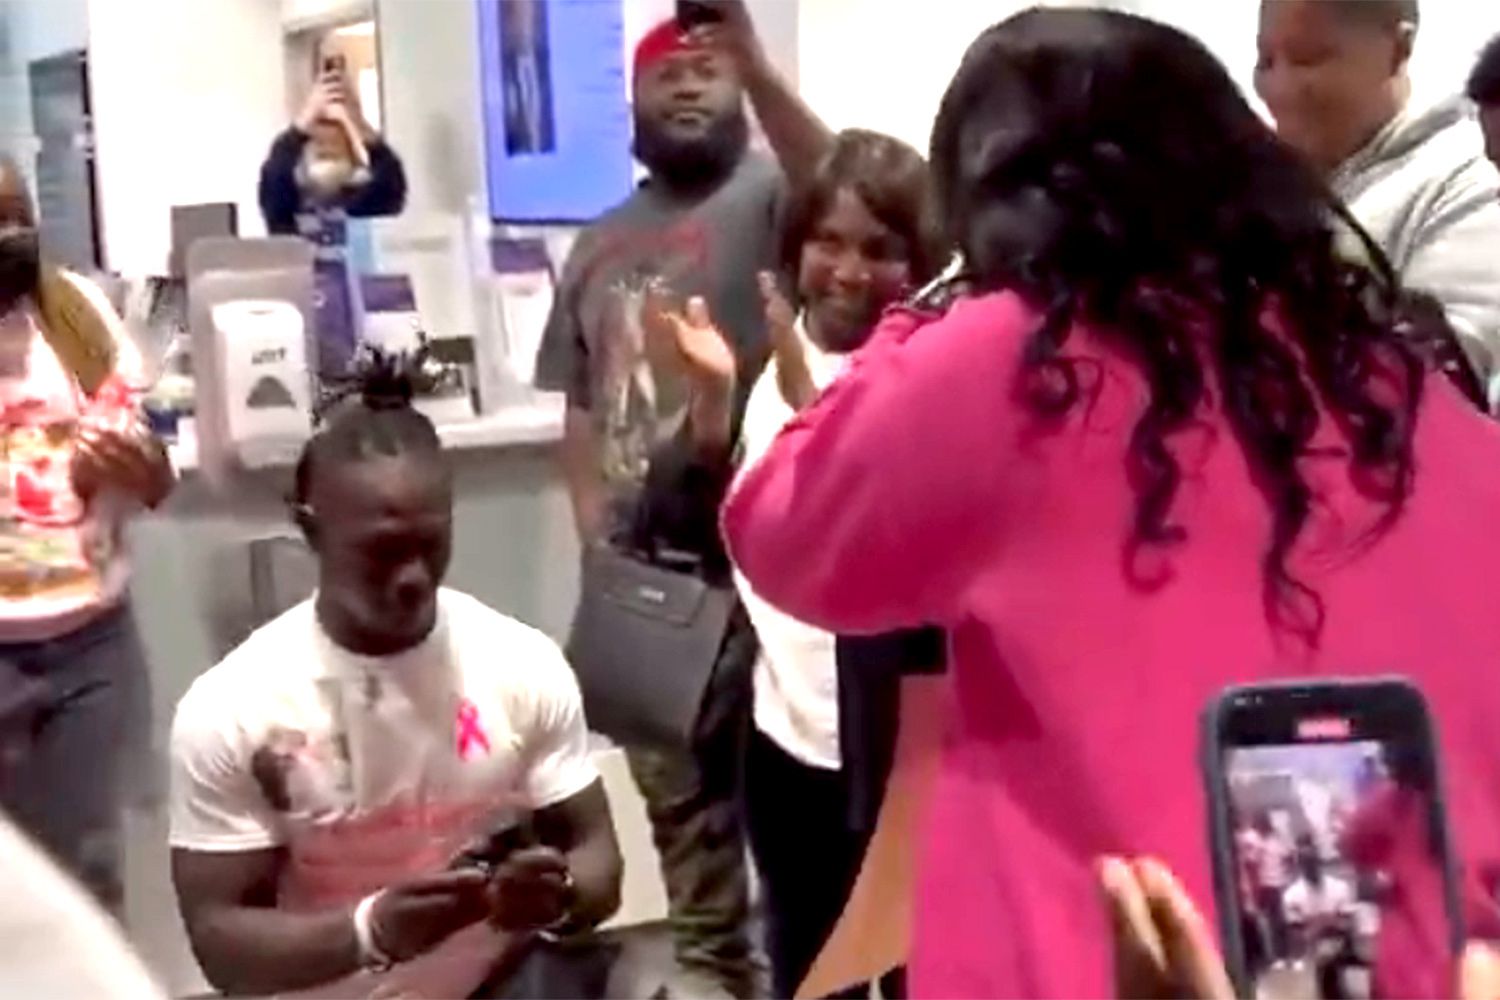 Man Surprises Girlfriend with Proposal as She Rang Chemotherapy Bell [Video]